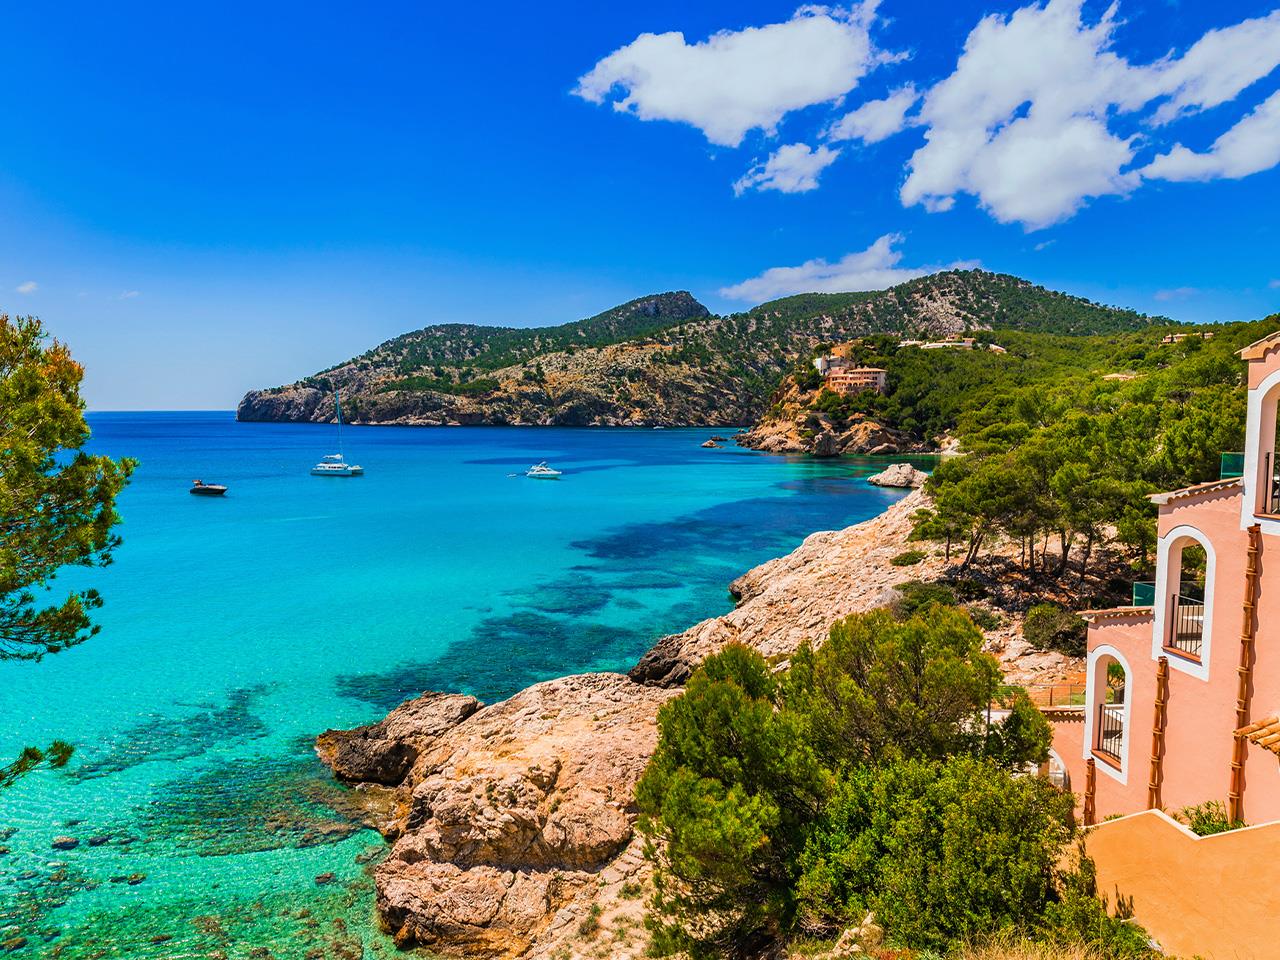 10 Awesome Things to Do in Mallorca, Spain